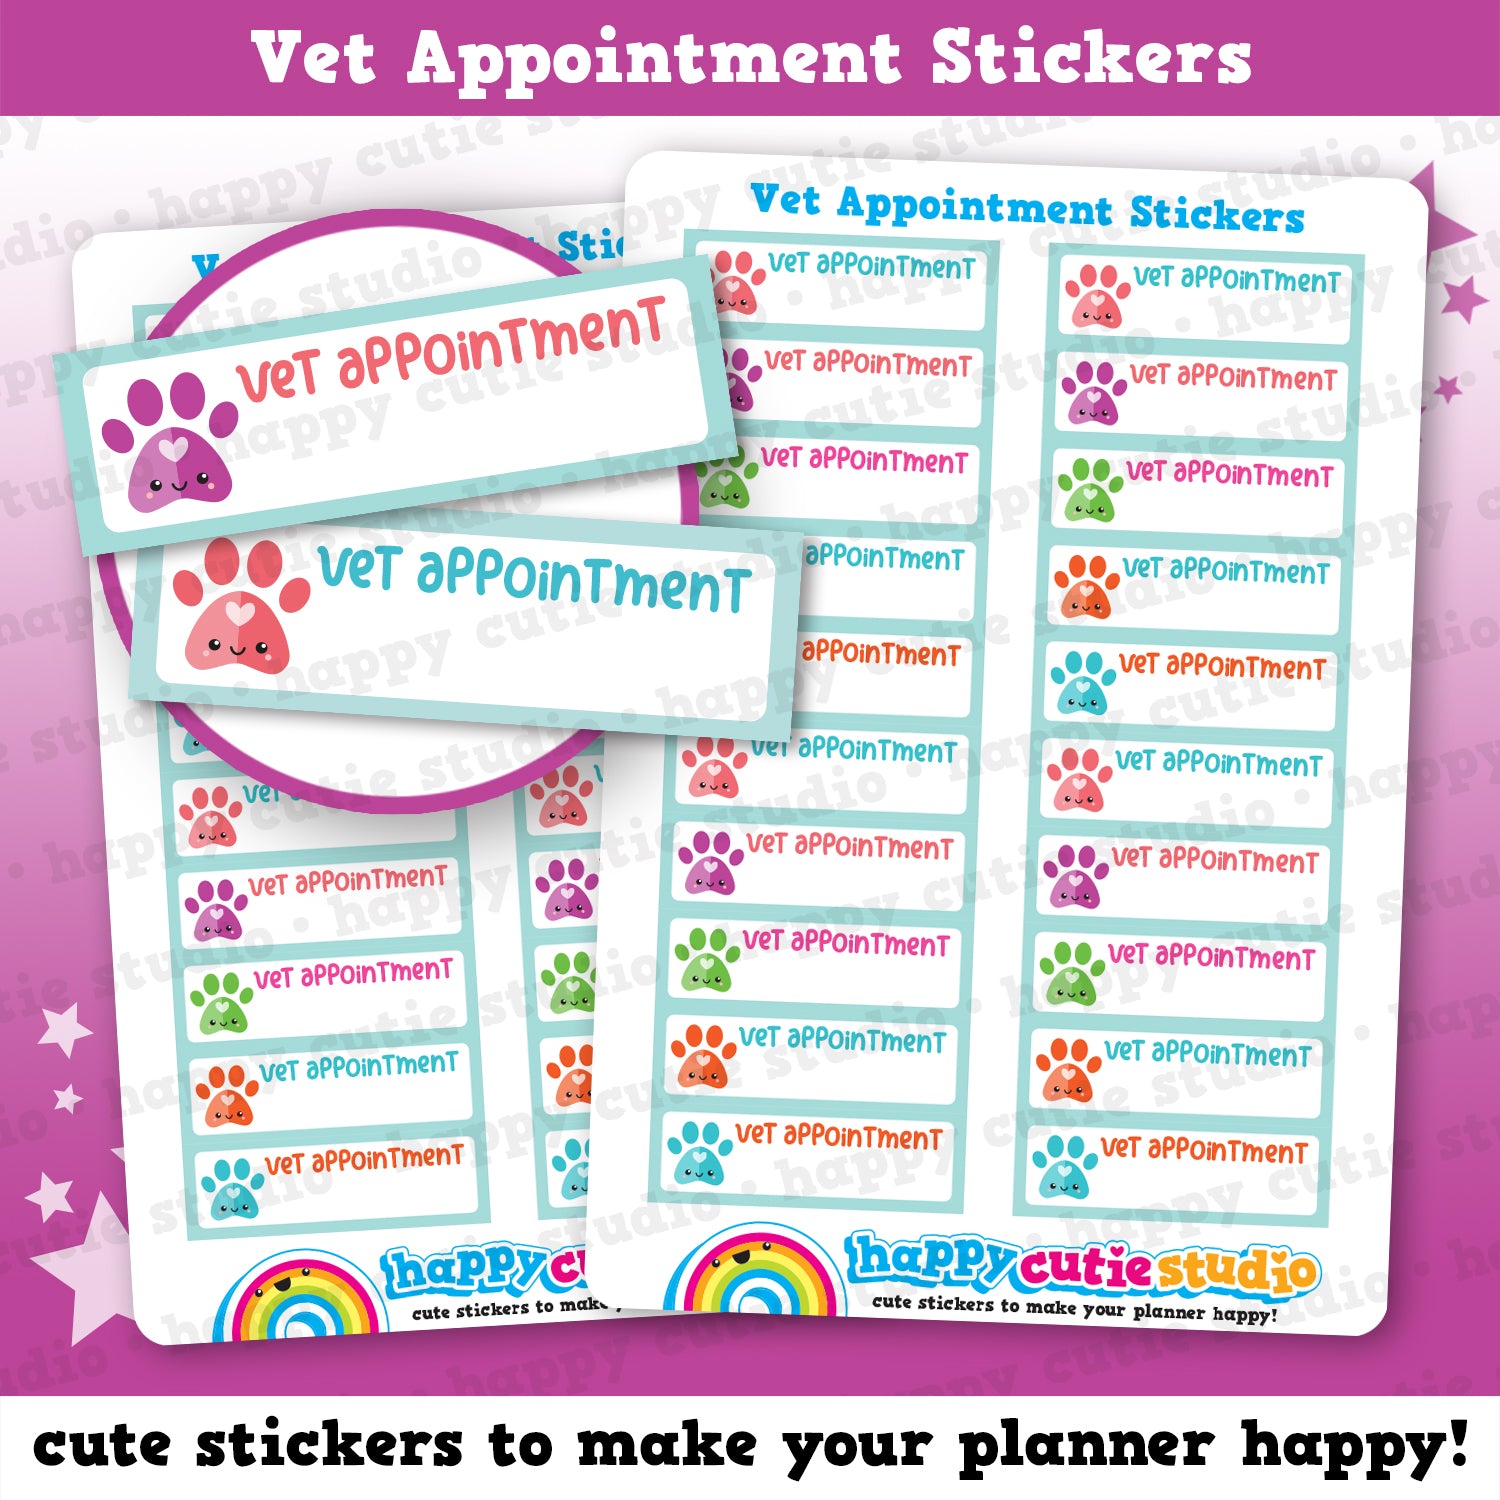 20 Cute Vet Appointment/Cat/Dog/Animal Stickers